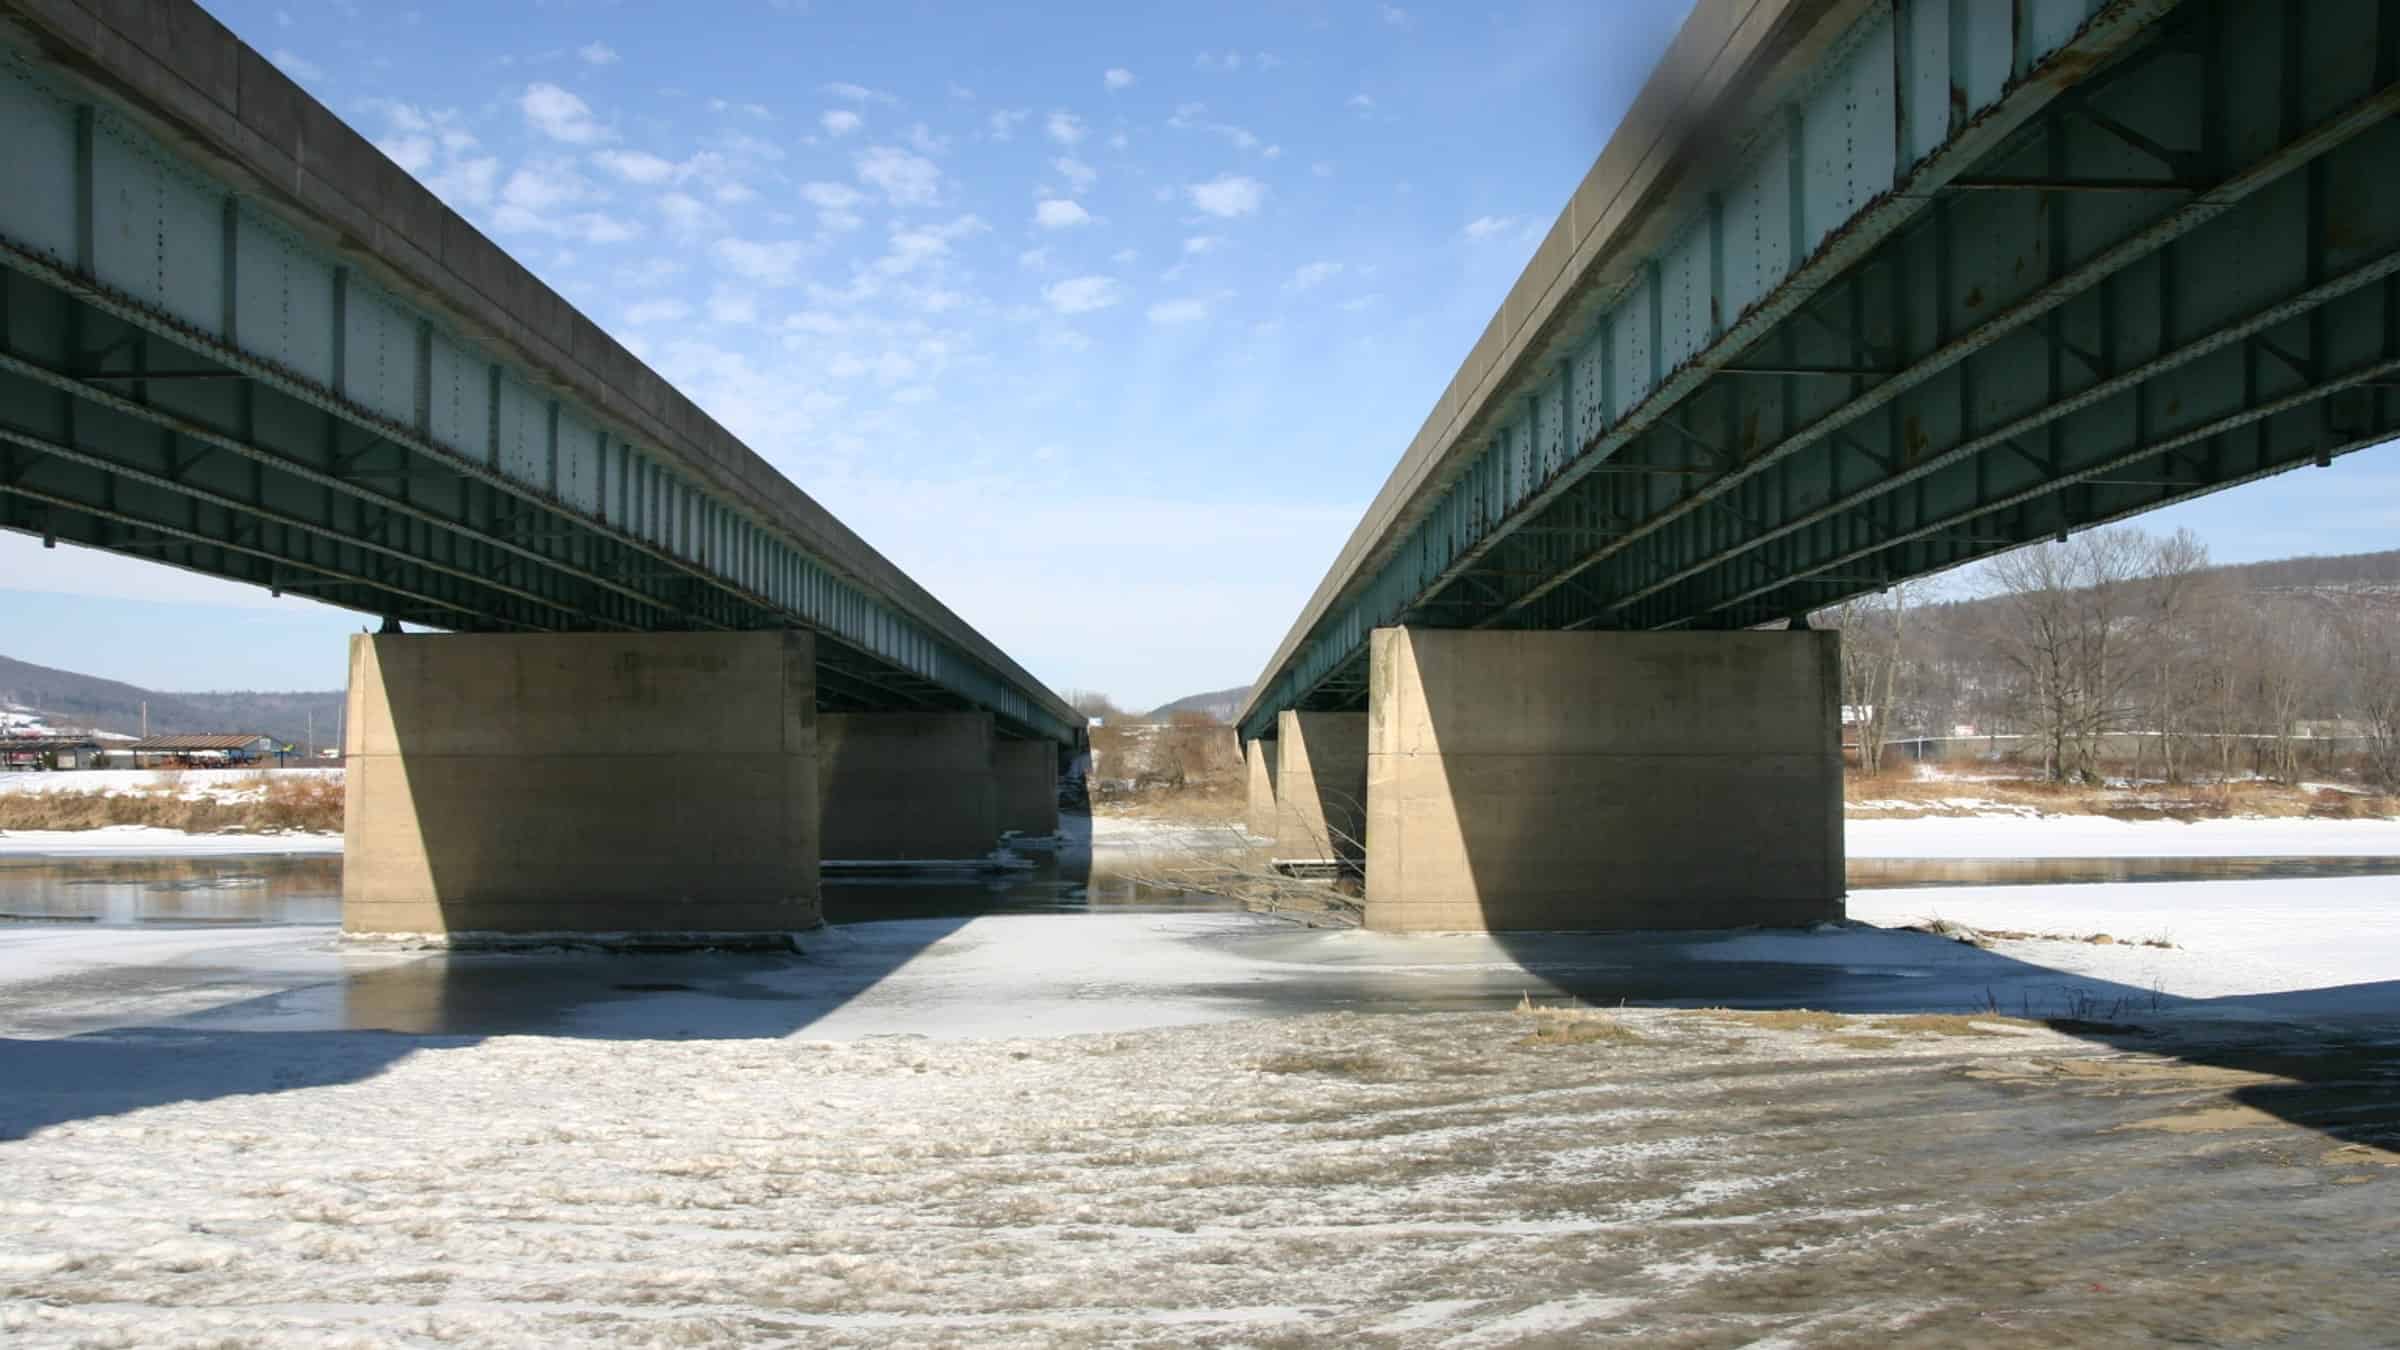 The two Interstate 81 bridges extend over an icy Susquehanna River.